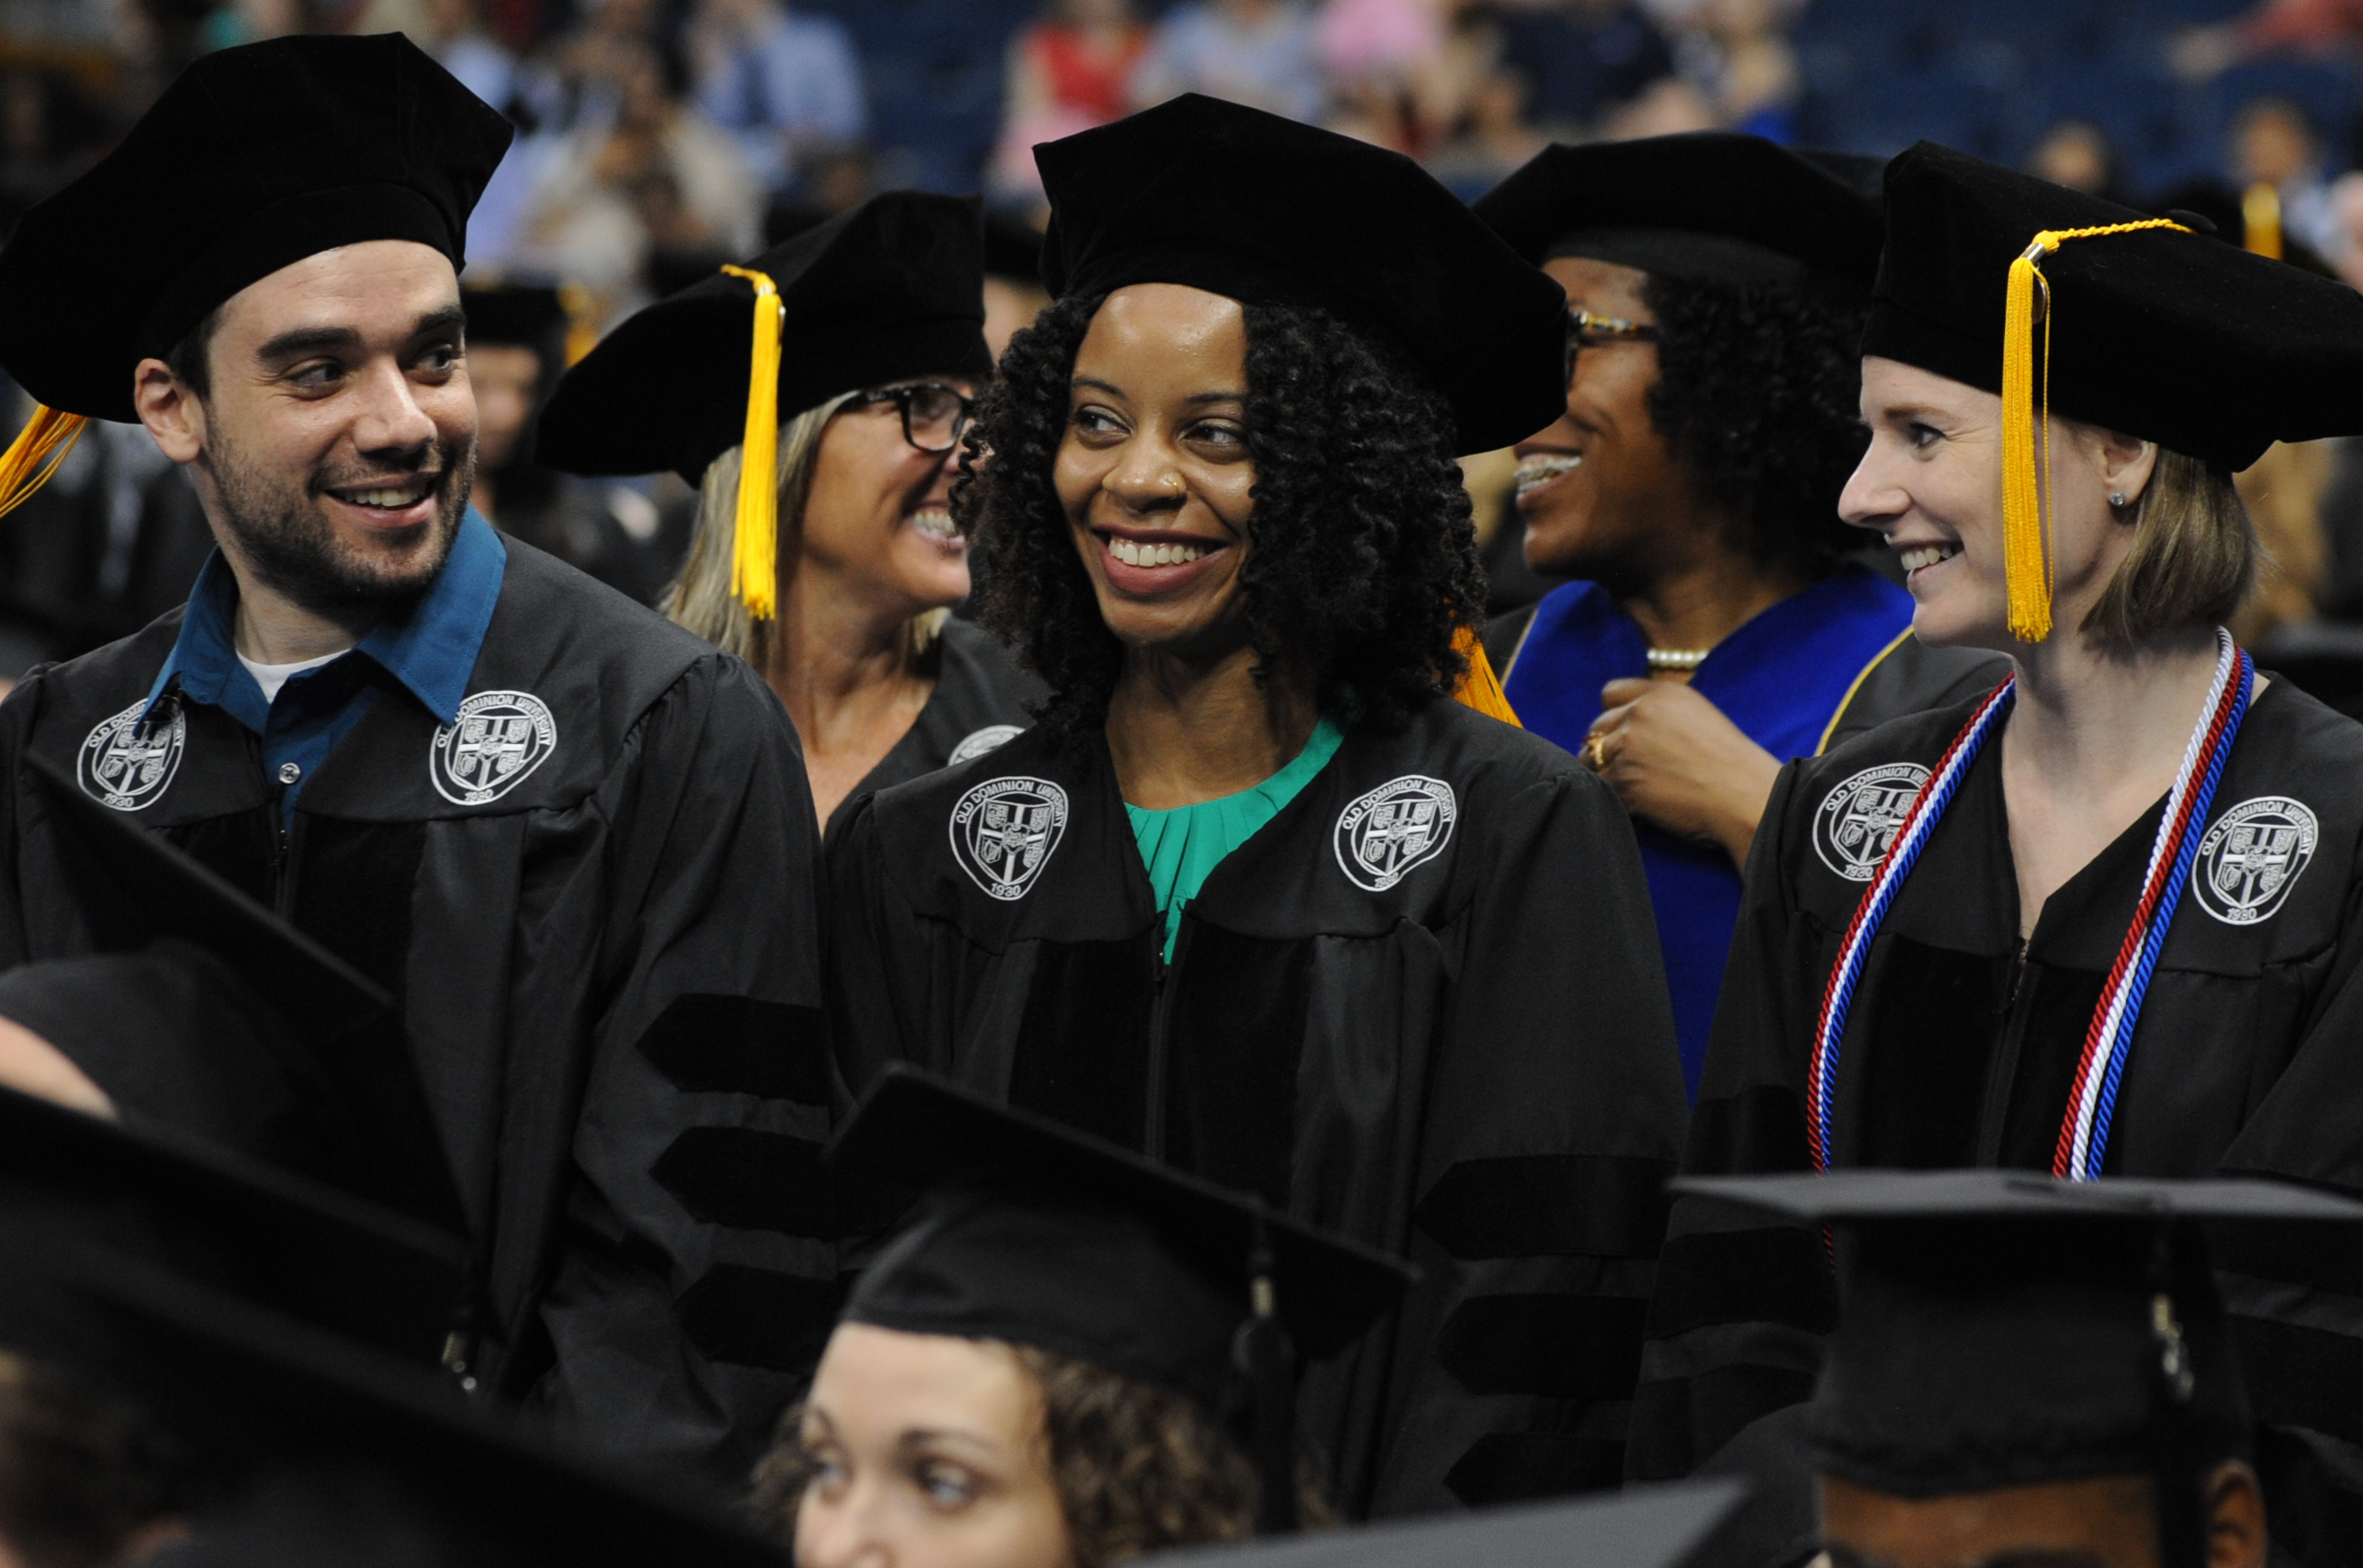 ODU's 126th Commencement